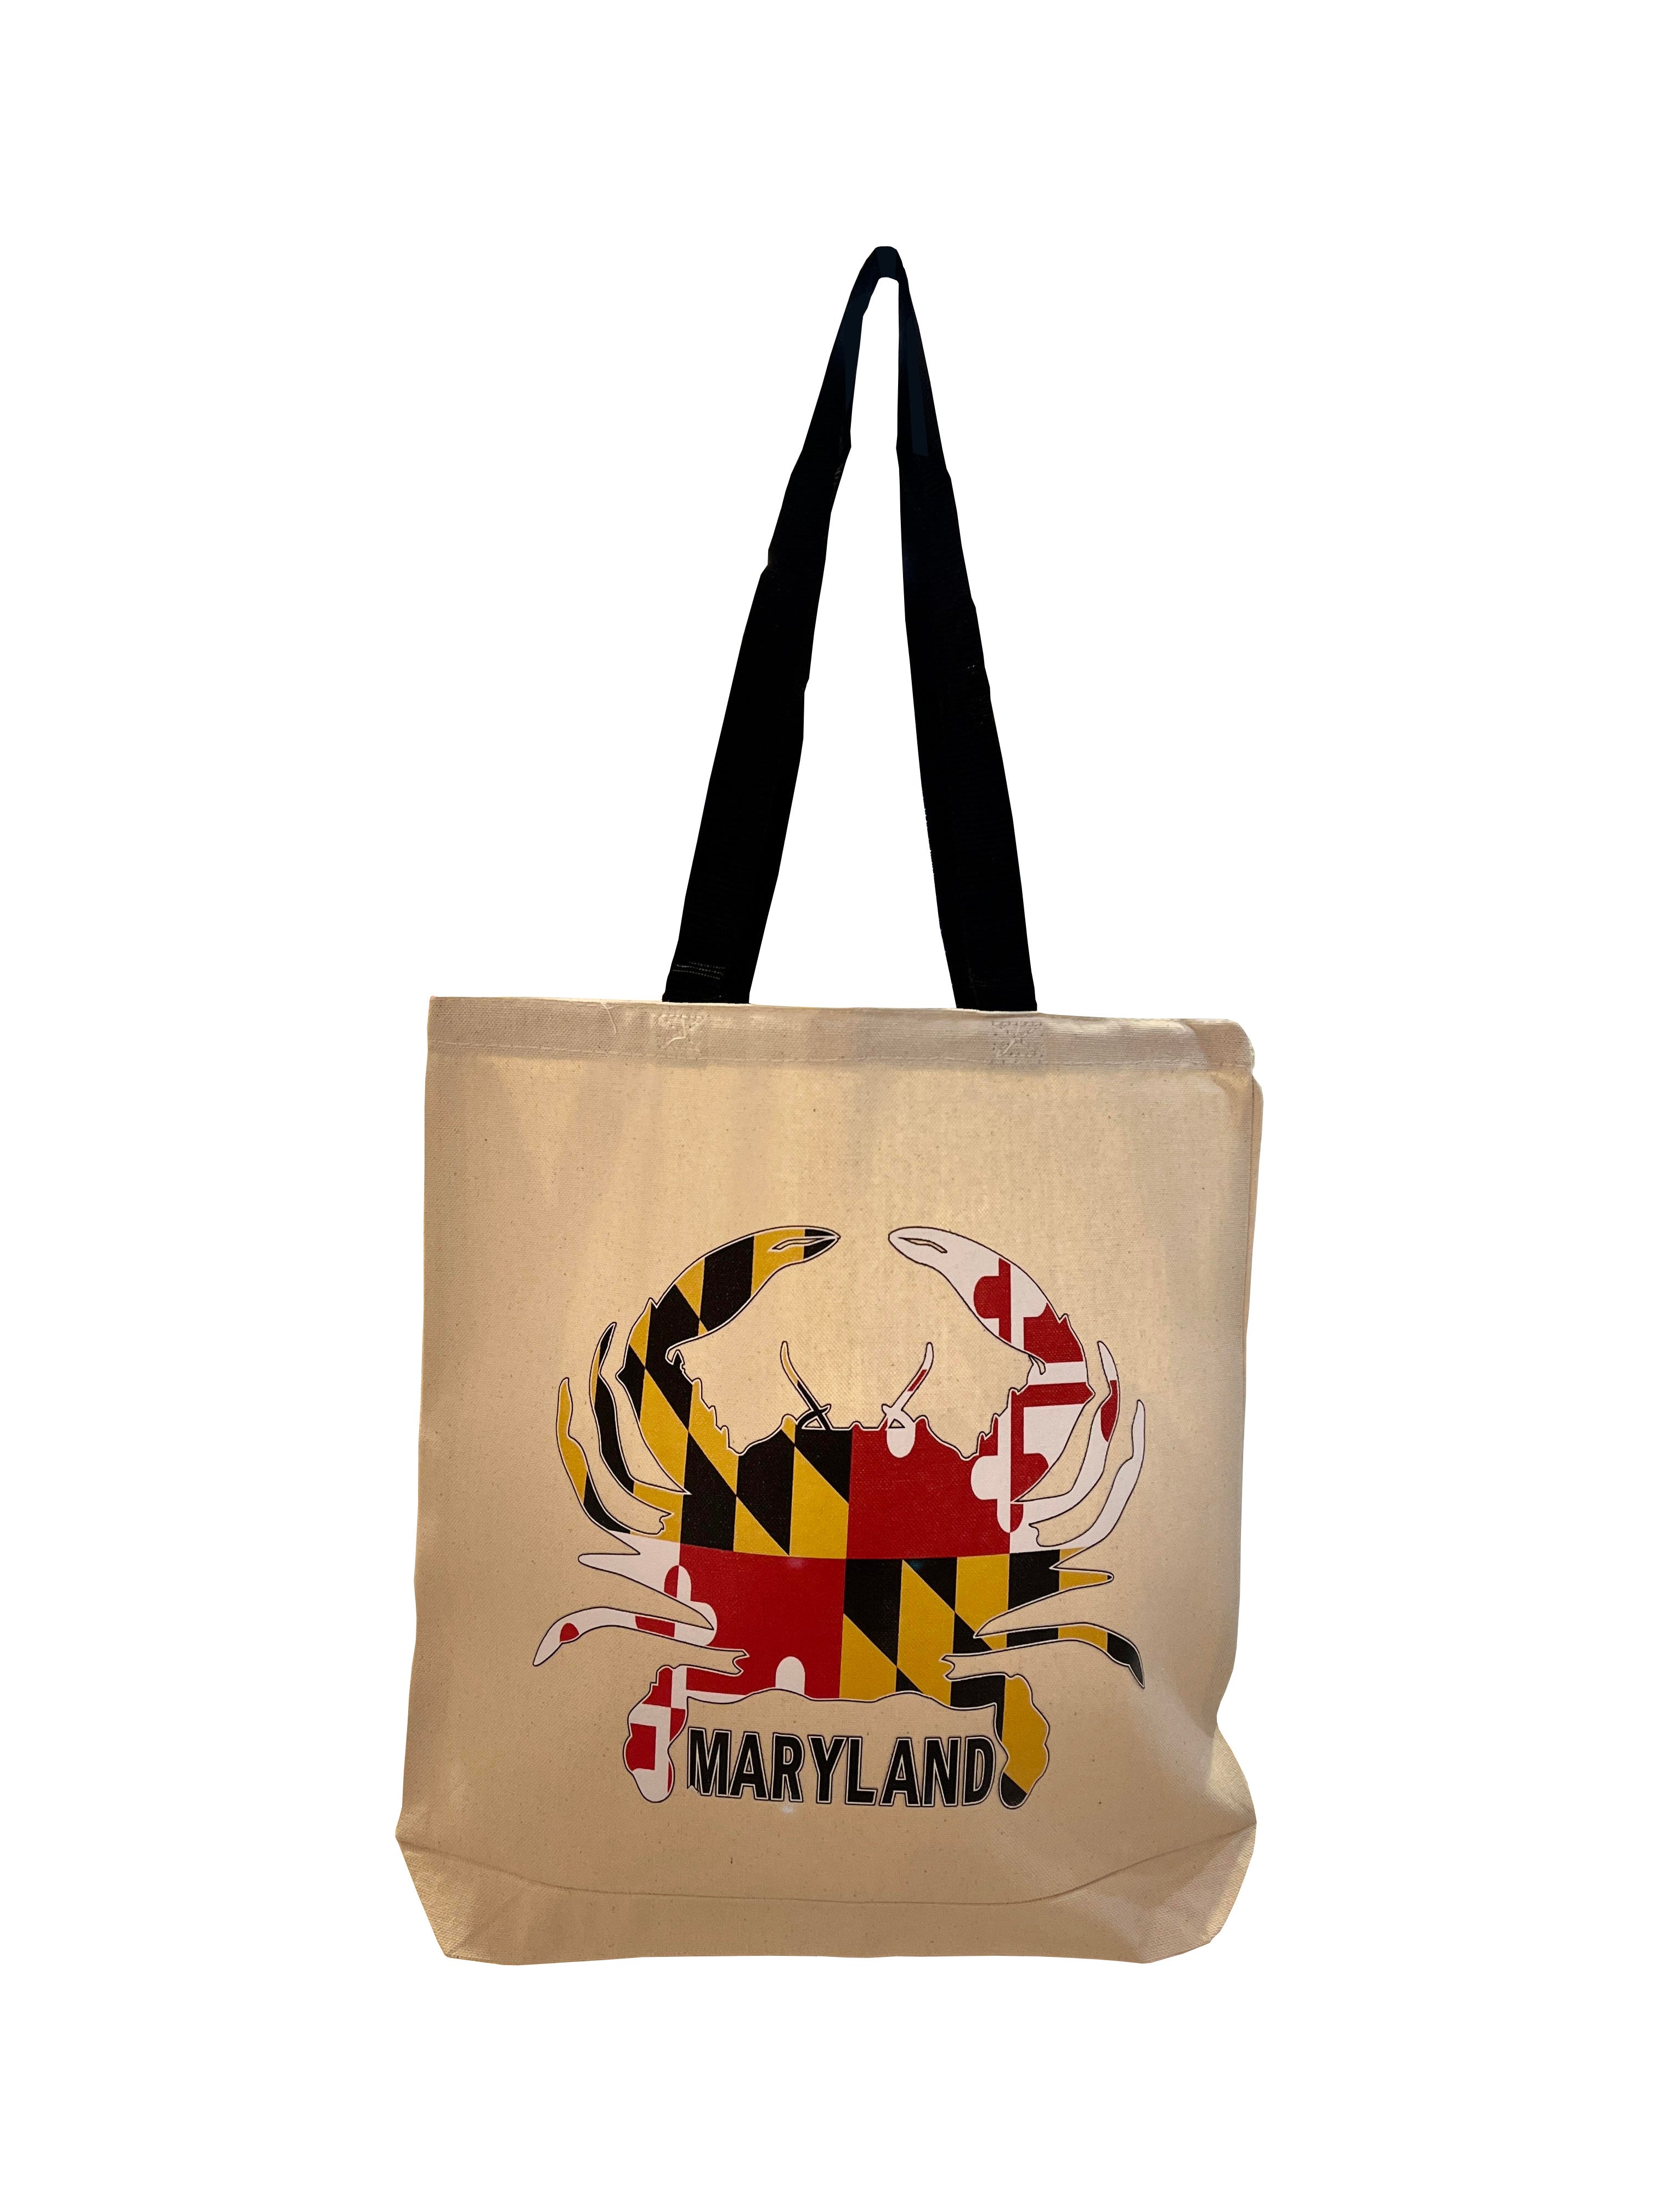 Maryland Lunch Tote – Maryland My Maryland